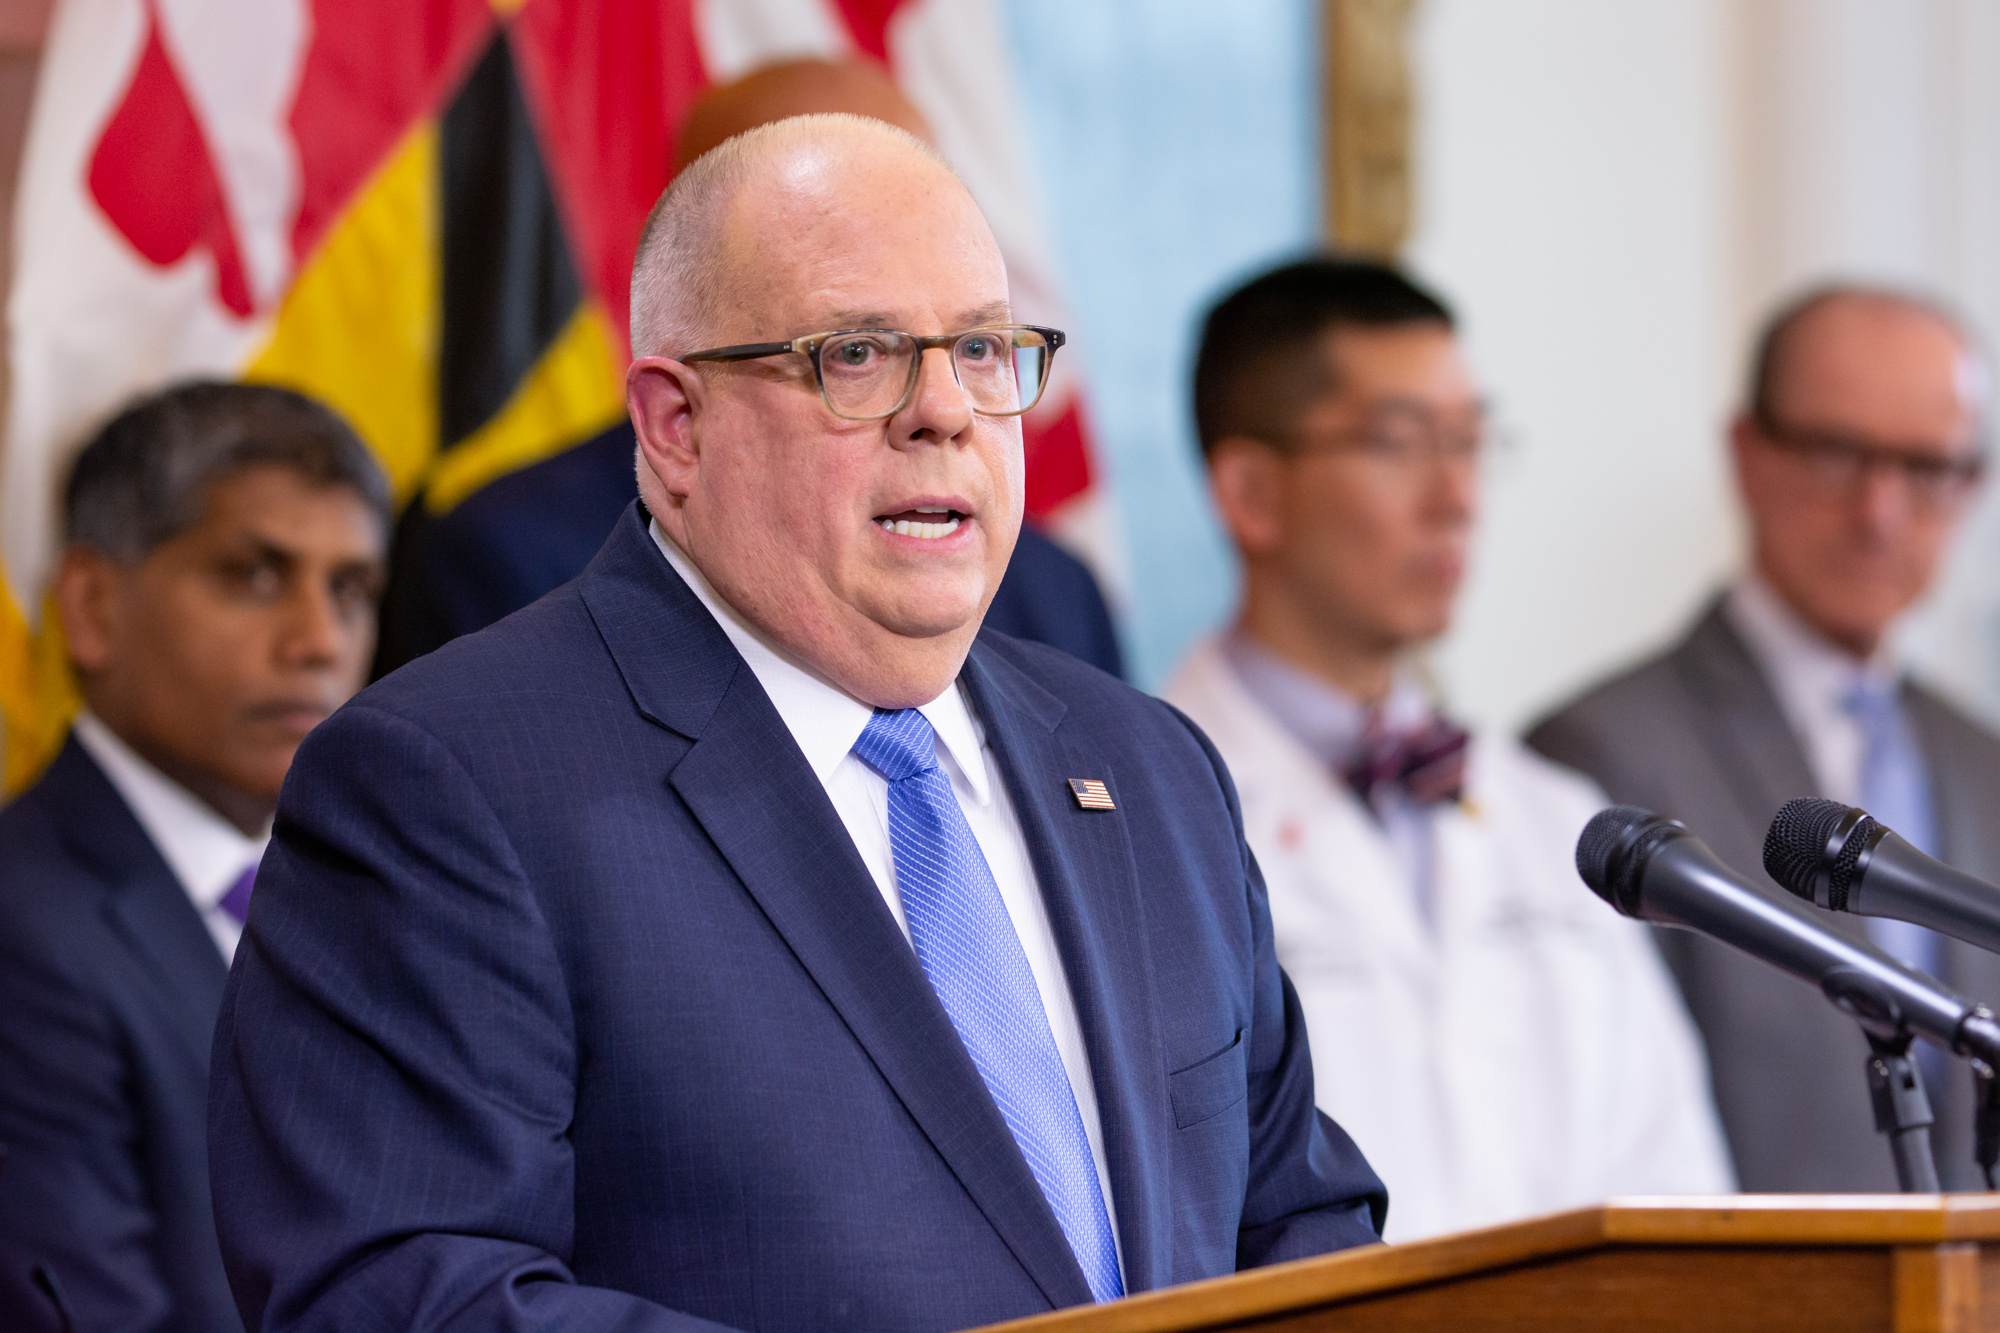 Maryland investing $67 million in cancer projects, research